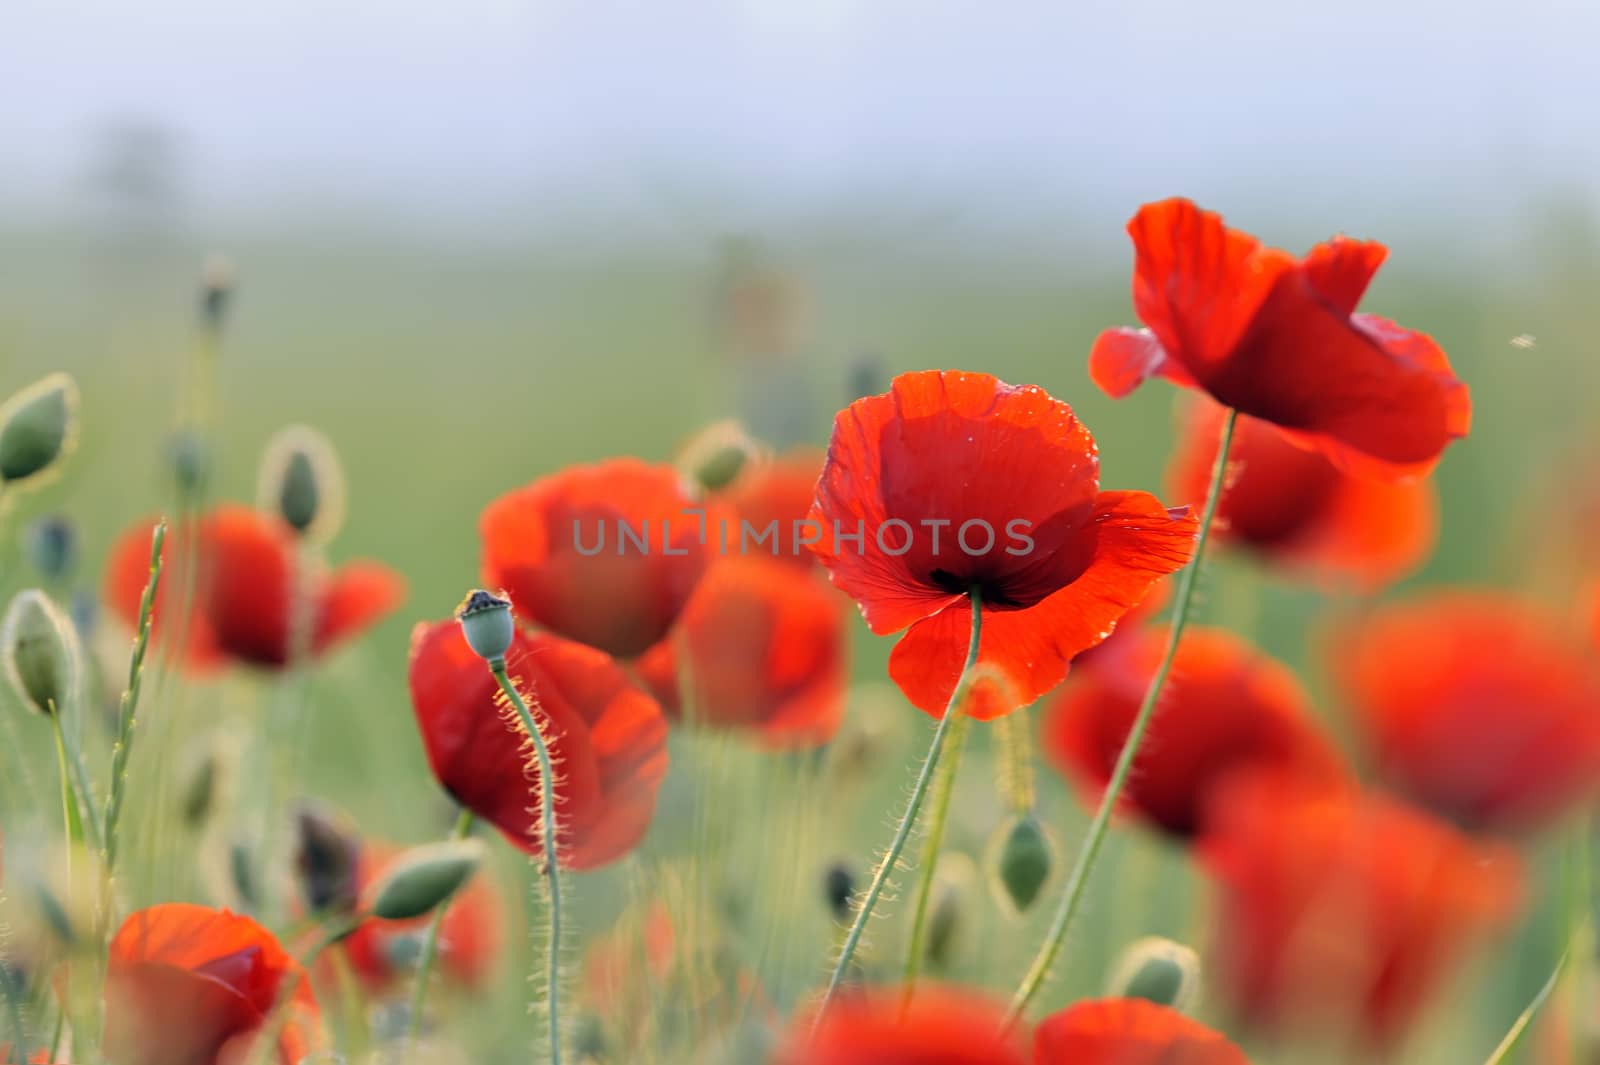 Sunset and landscape with red poppy field